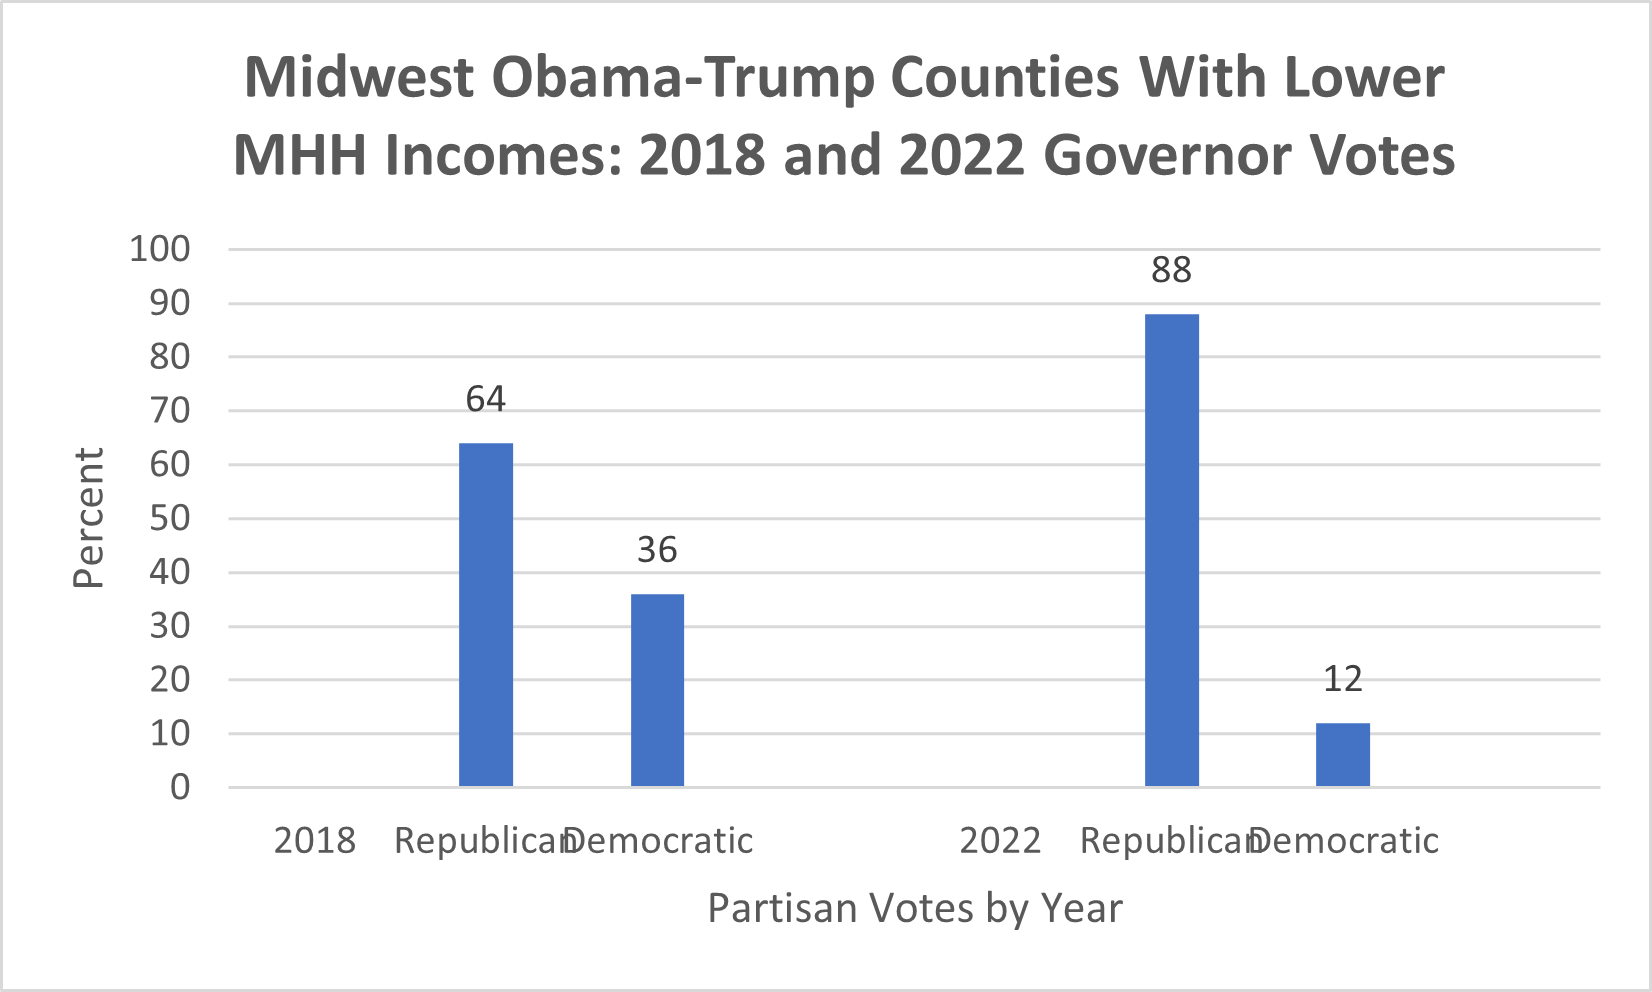 Bar graph of Midwest Obama-Trump Counties with Low Income